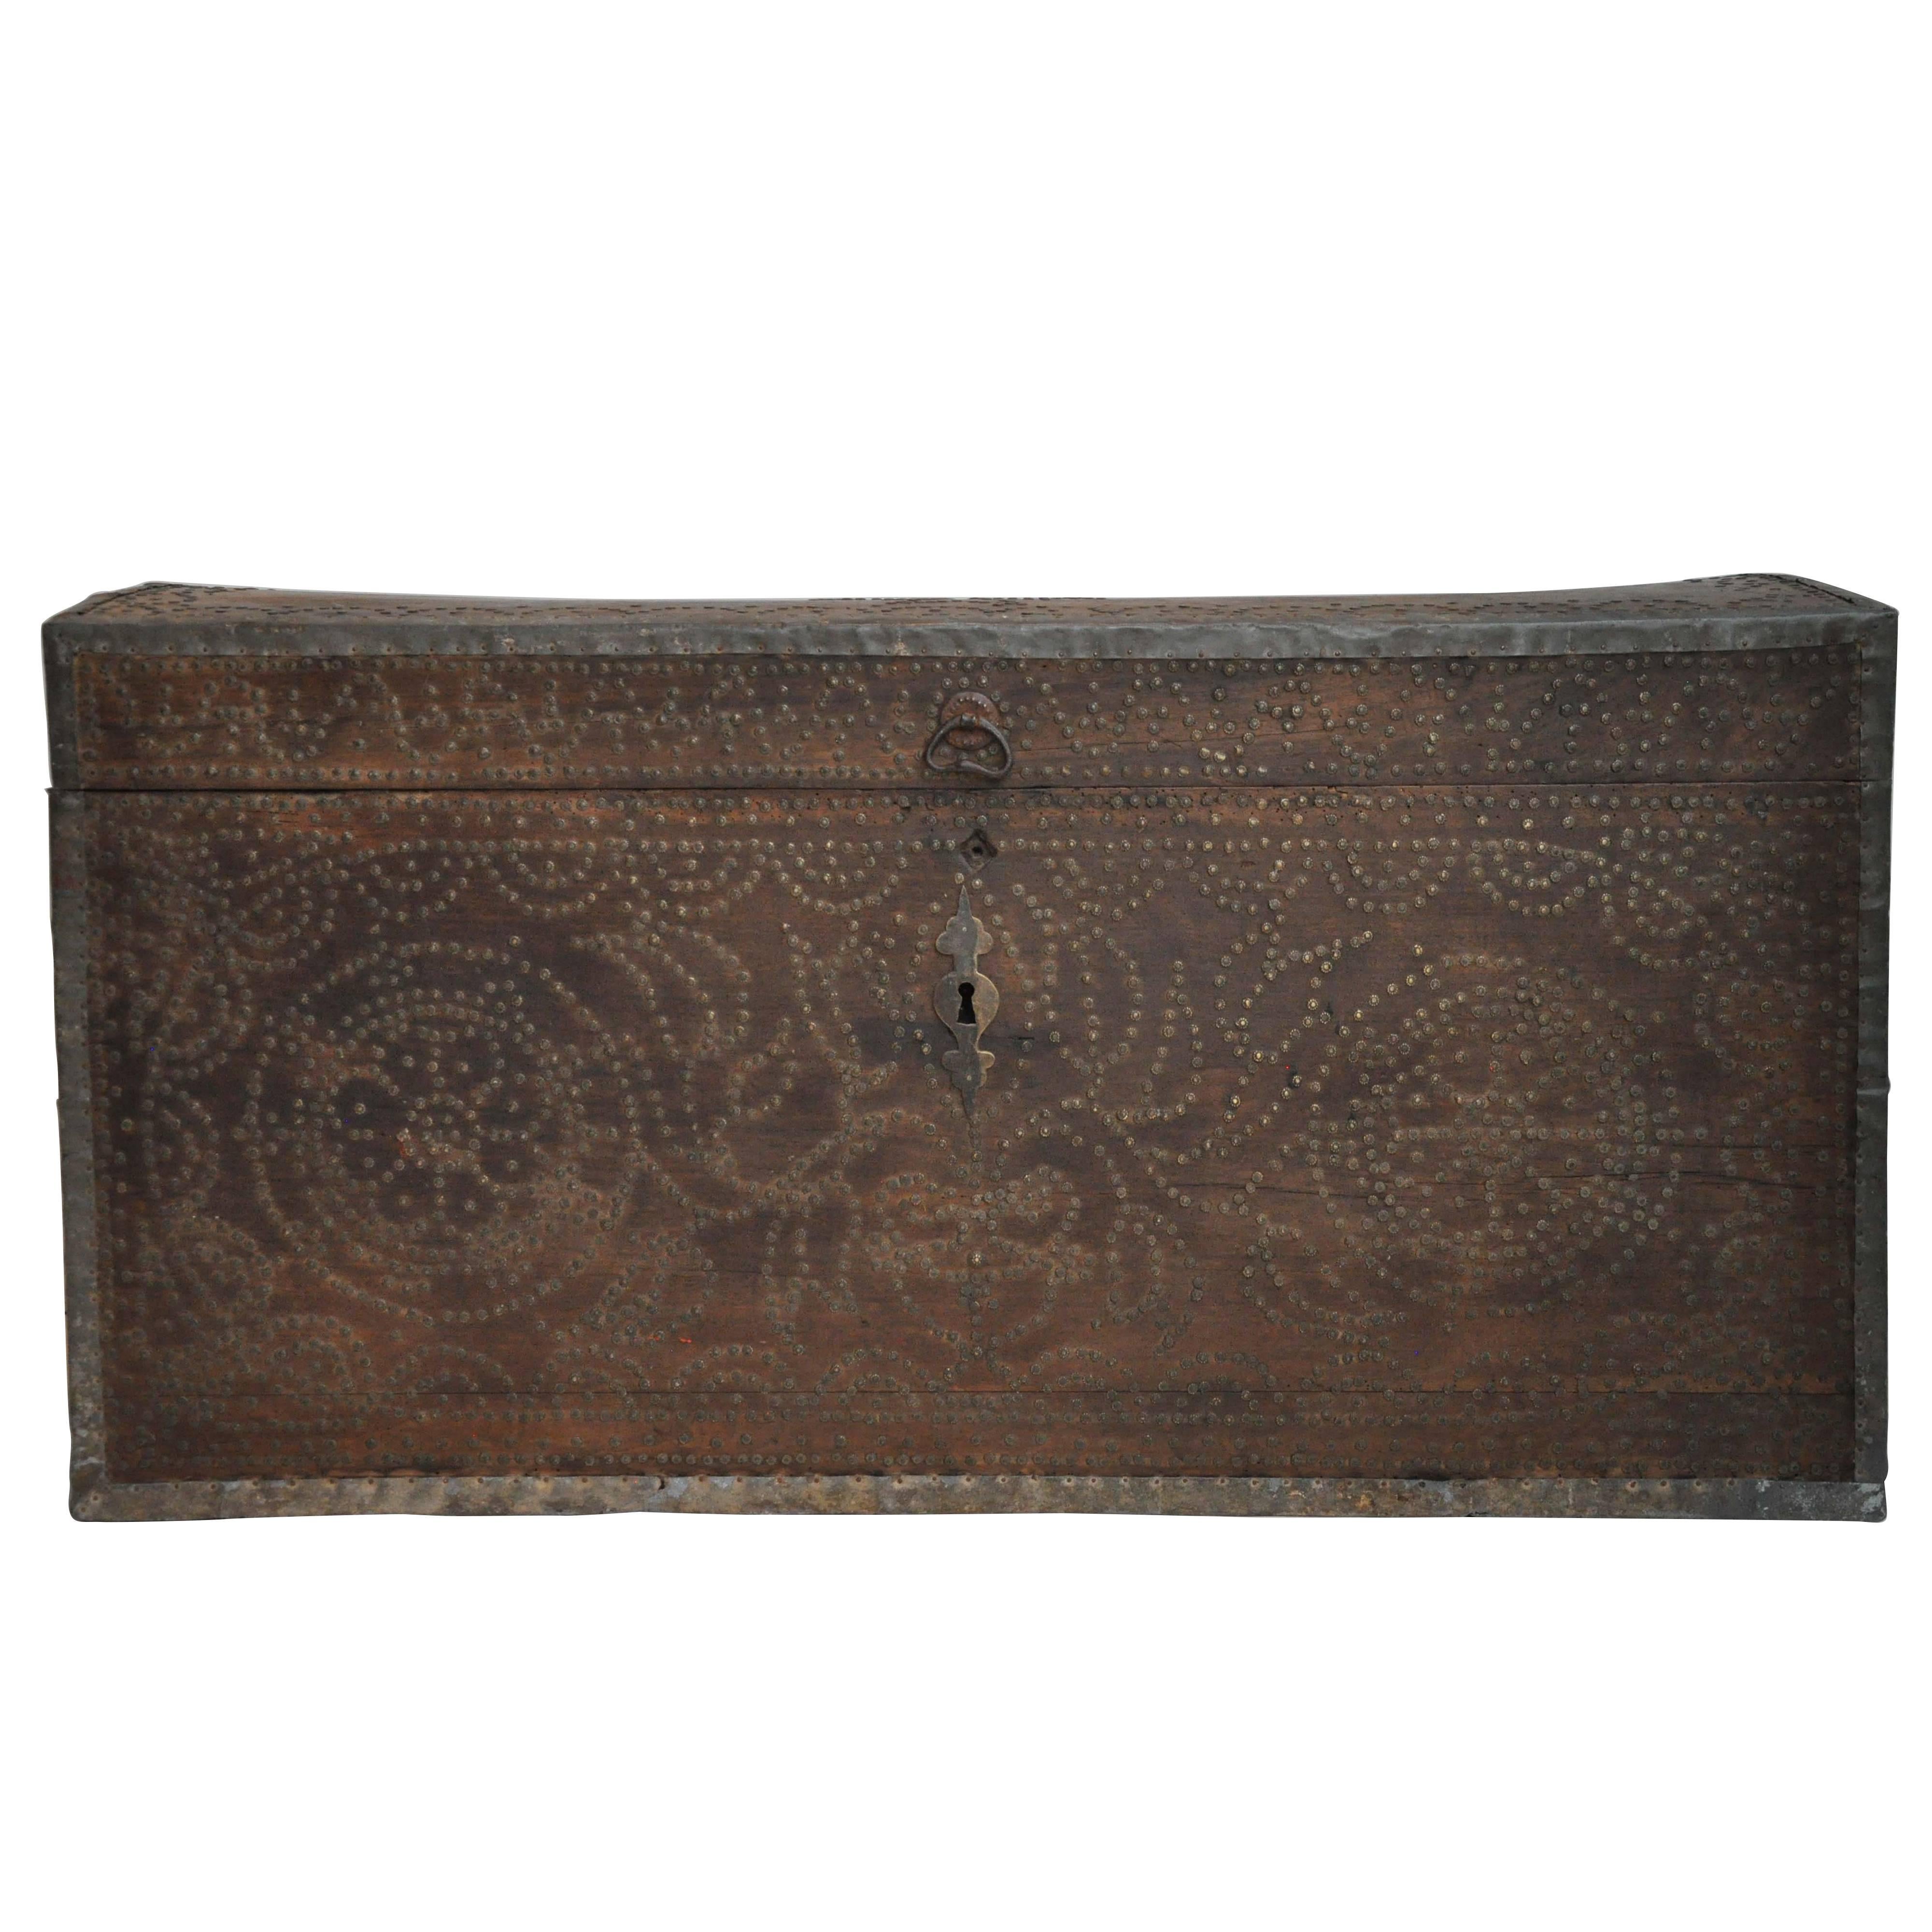 Late 19th Century Studded Trunk from France